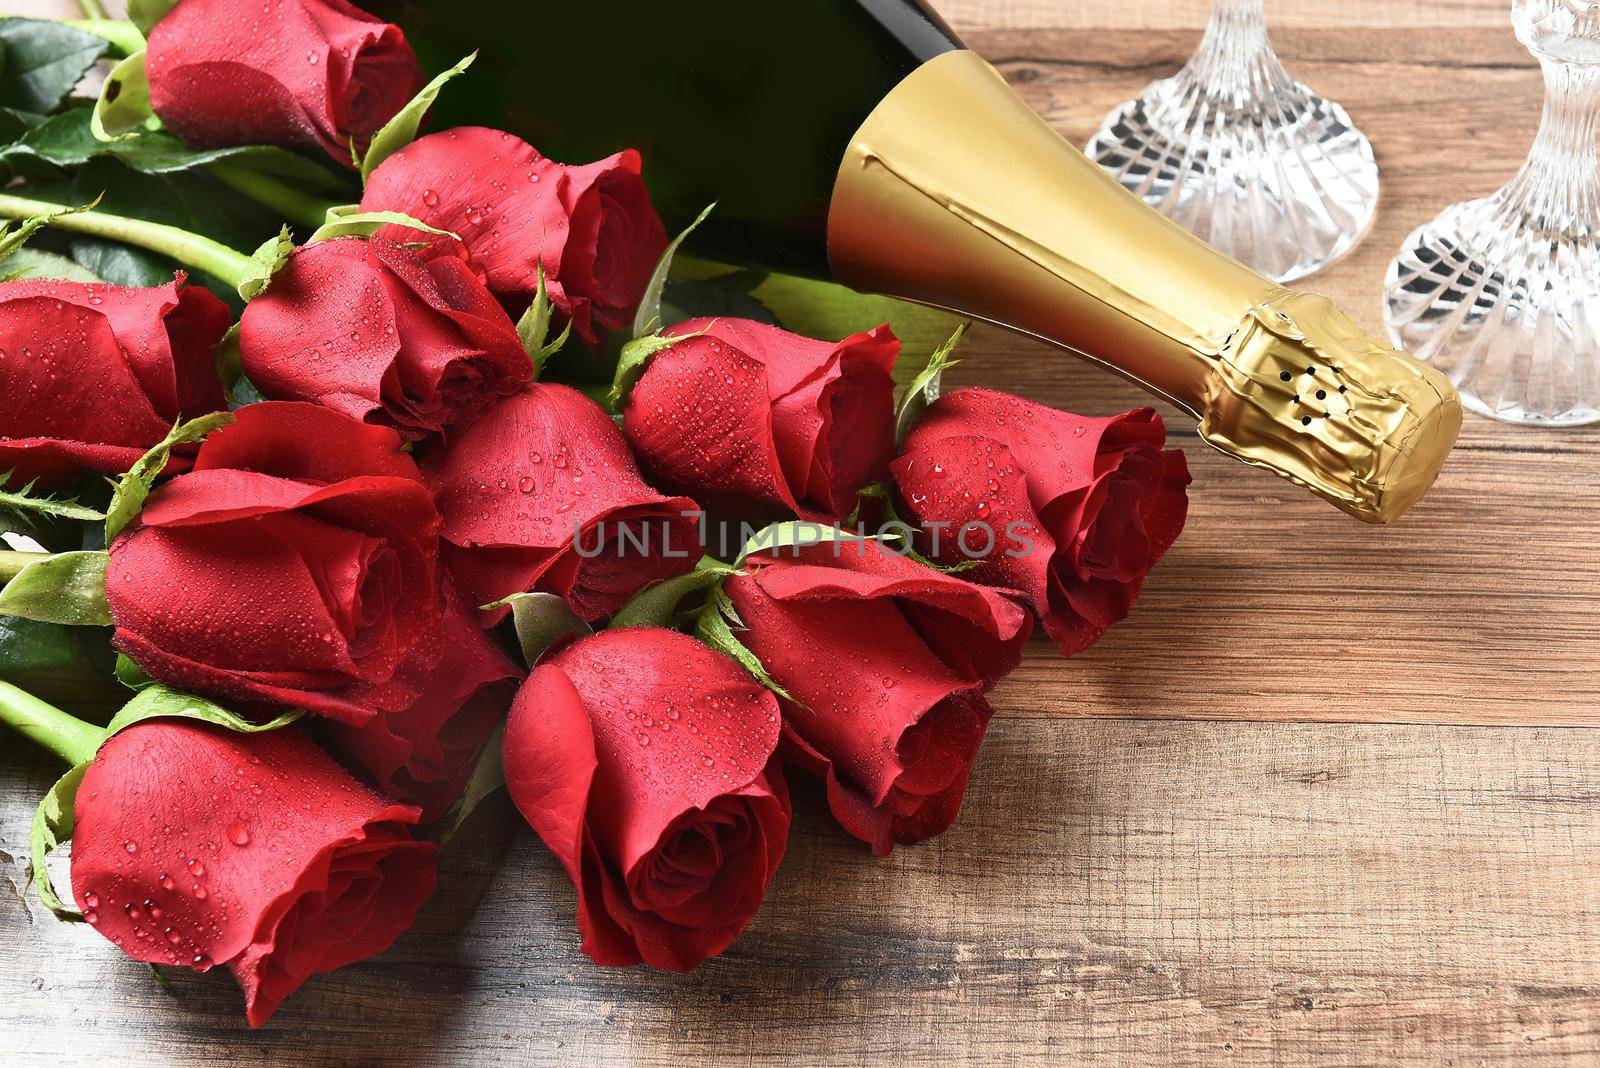 Closeup of a bottle of champagne and red roses on a wood table. Valentines Day / Love concept.